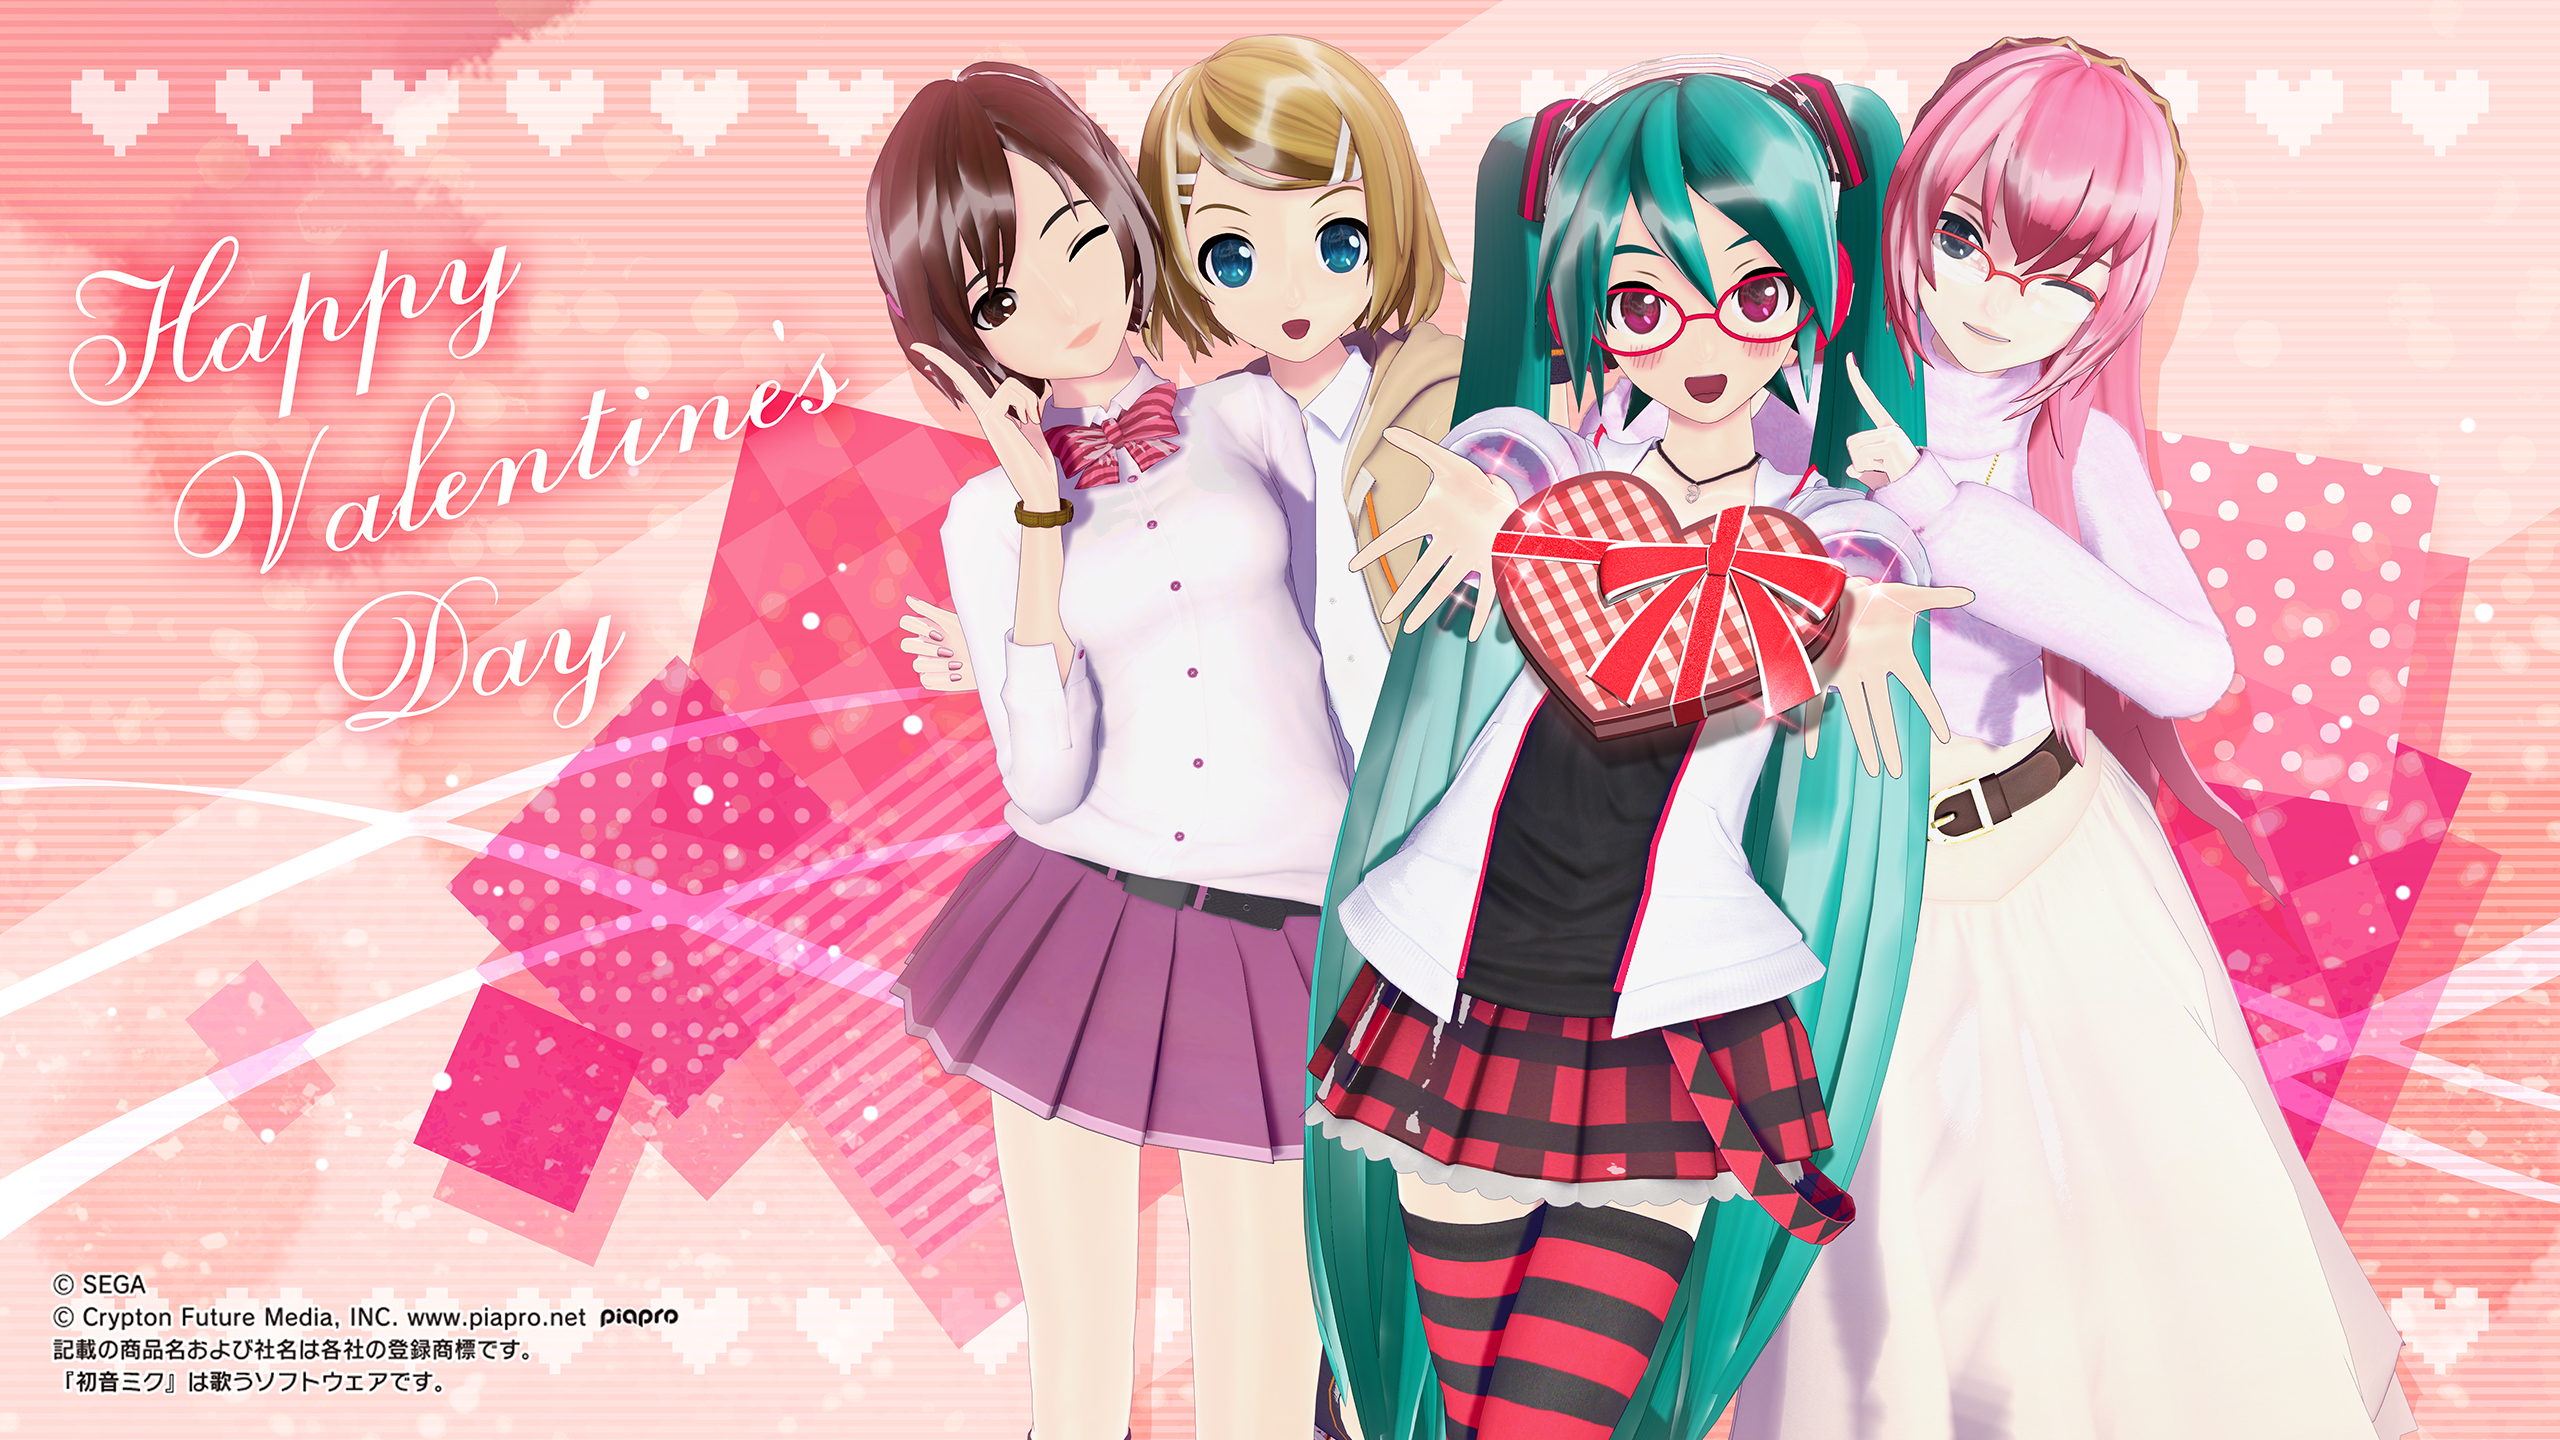 Project DIVA Team Celebrates Valentine's Day With Project DIVA X Video and Wallpaper